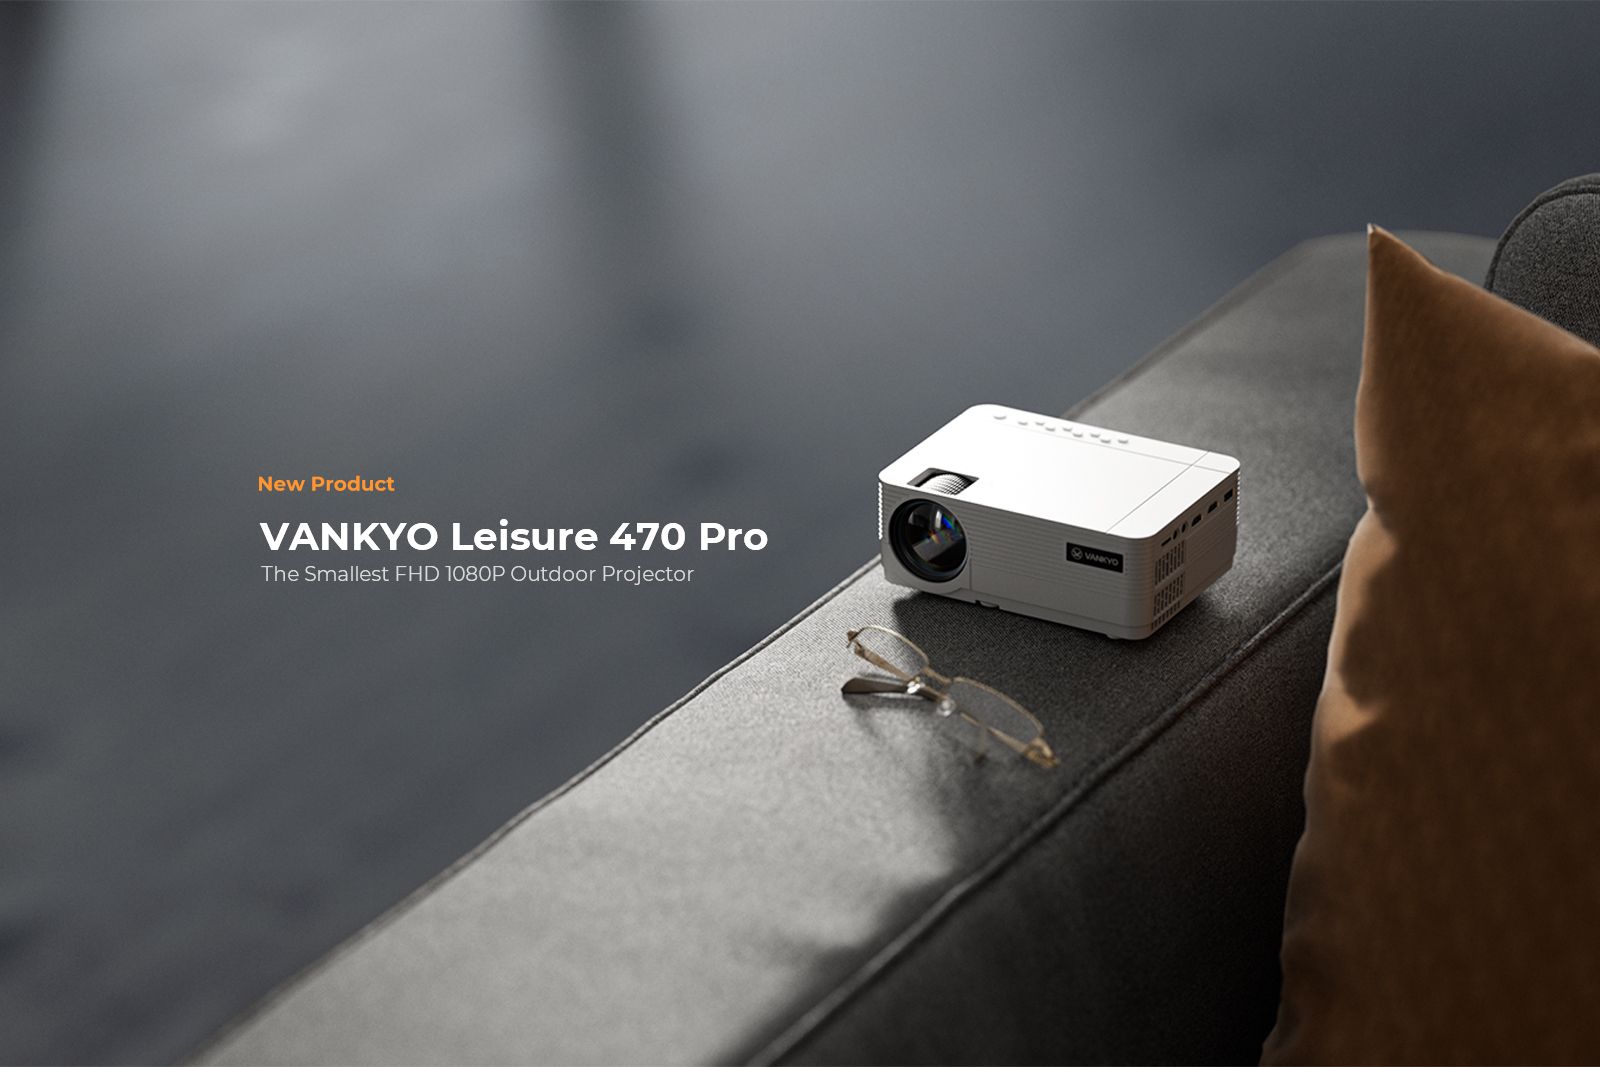 Meet VANKYO Leisure 470 Pro, one of the smallest outdoor native 1080P LCD projectors on the market photo 6